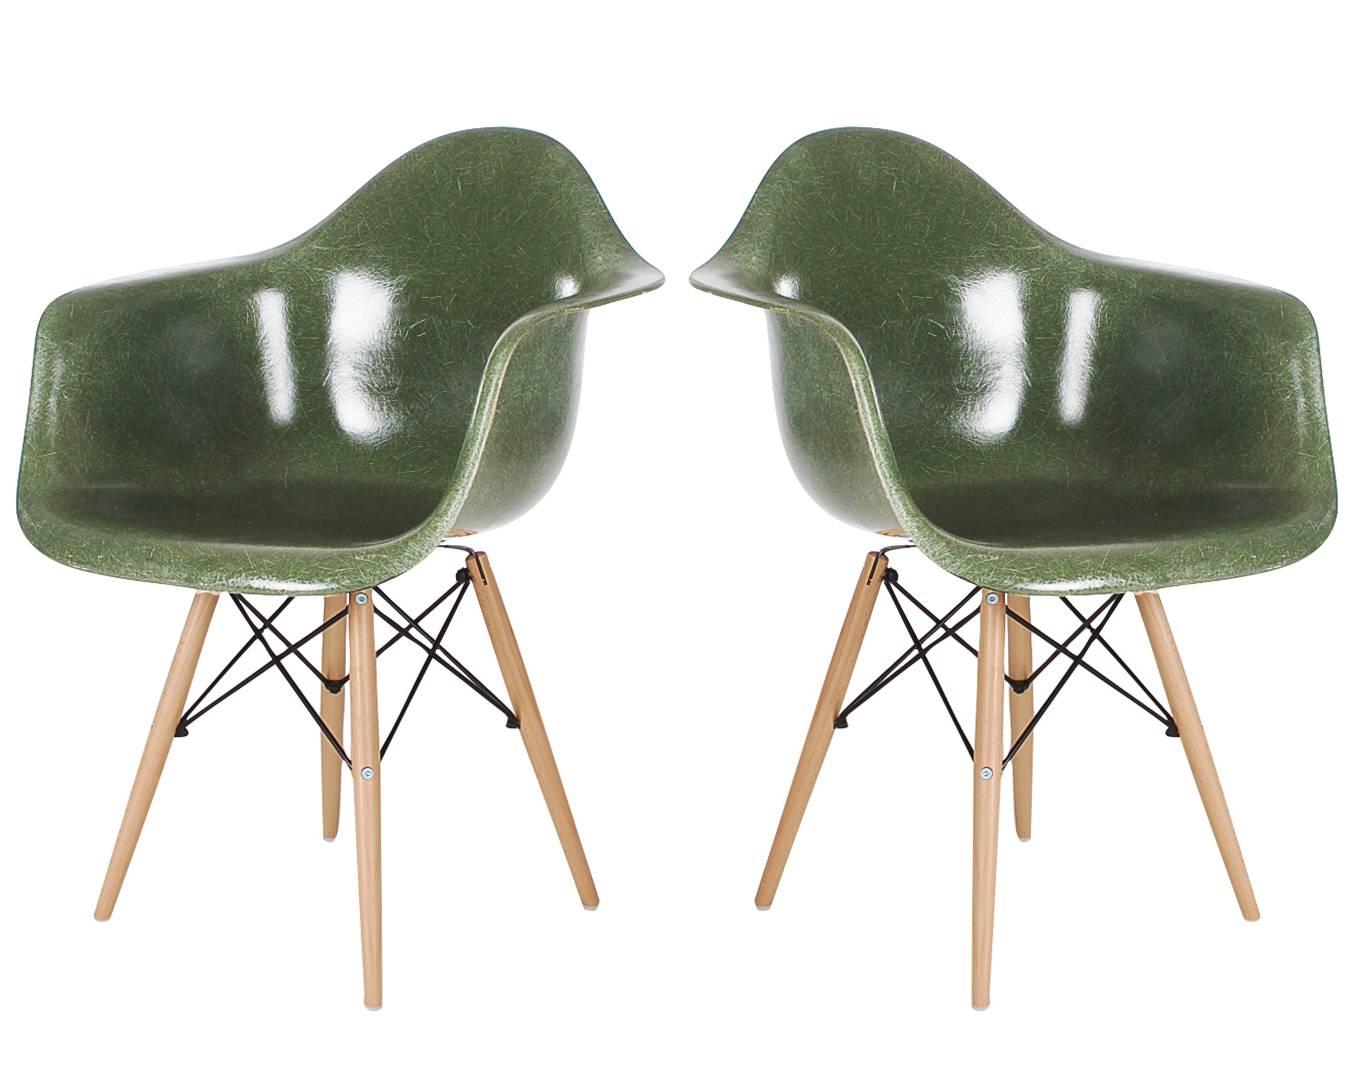 A beautiful matching pair of hunter green armchairs designed by Charles Eames for Herman Miller. Chairs are vintage circa 1960s, bases are newer reproductions.